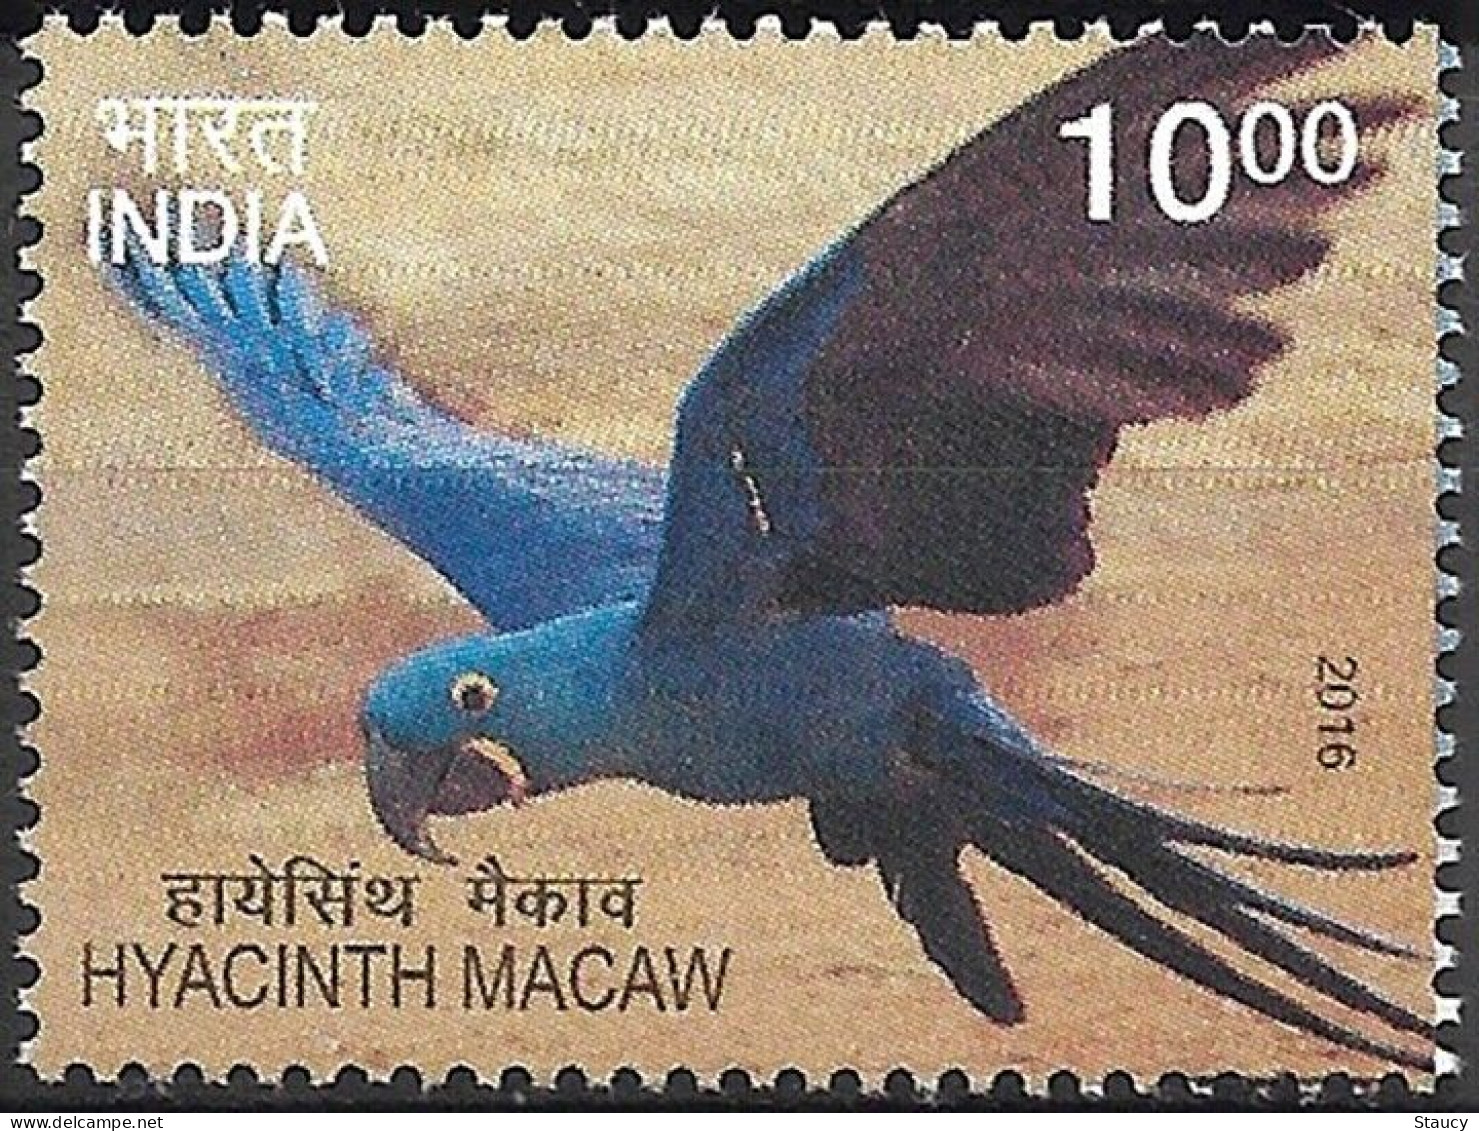 India 2016 Exotic Birds 1v Stamp MNH Macaw Parrot Amazon Crested, HYACINTH MACAW As Per Scan - Neufs